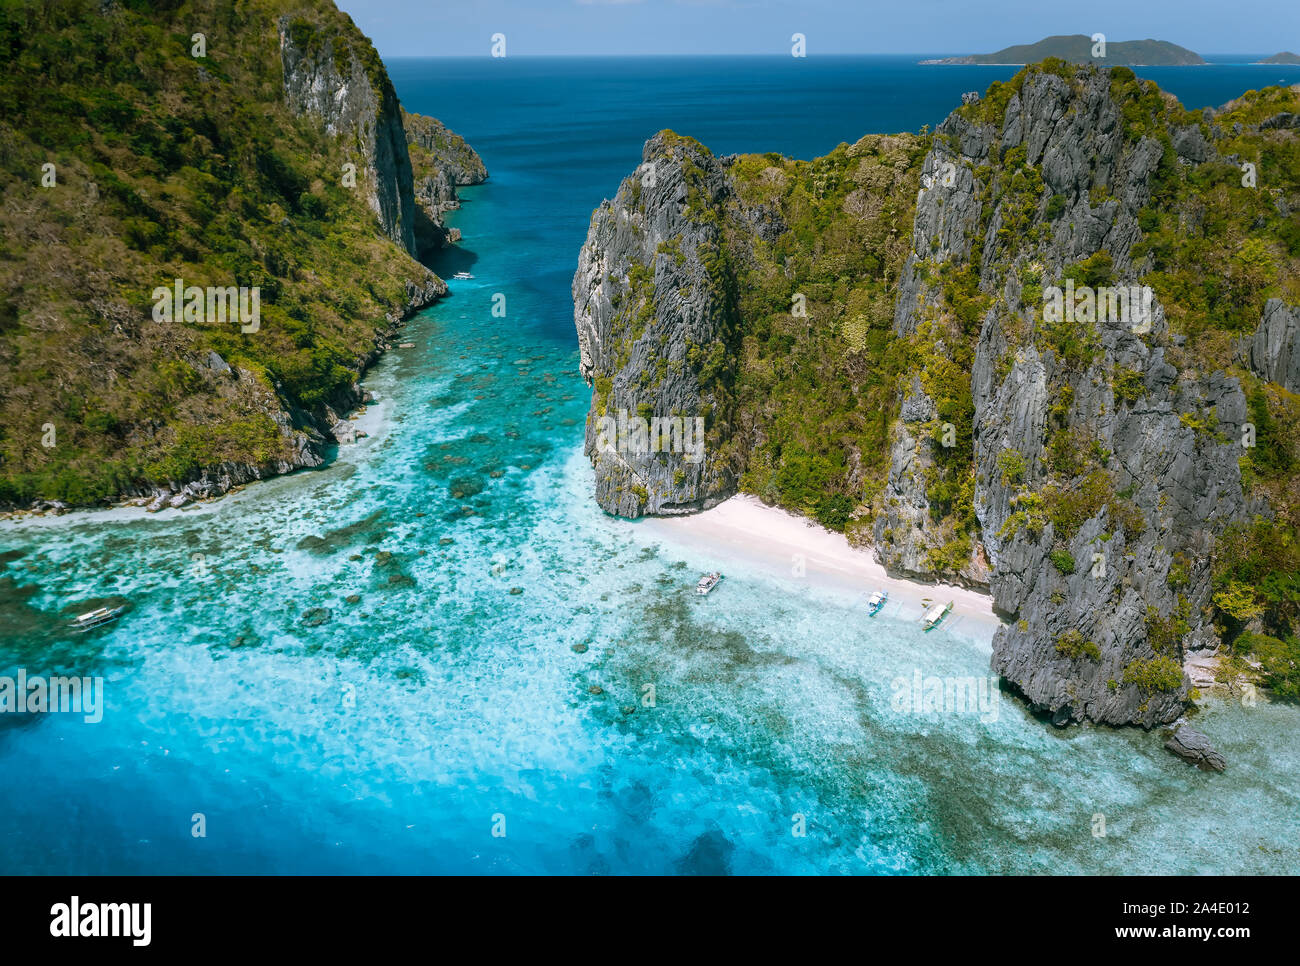 El Nido, Palawan, Philippines. Aerial view of tropical sea stack Island with tourist boats moored at white sandy beach Stock Photo